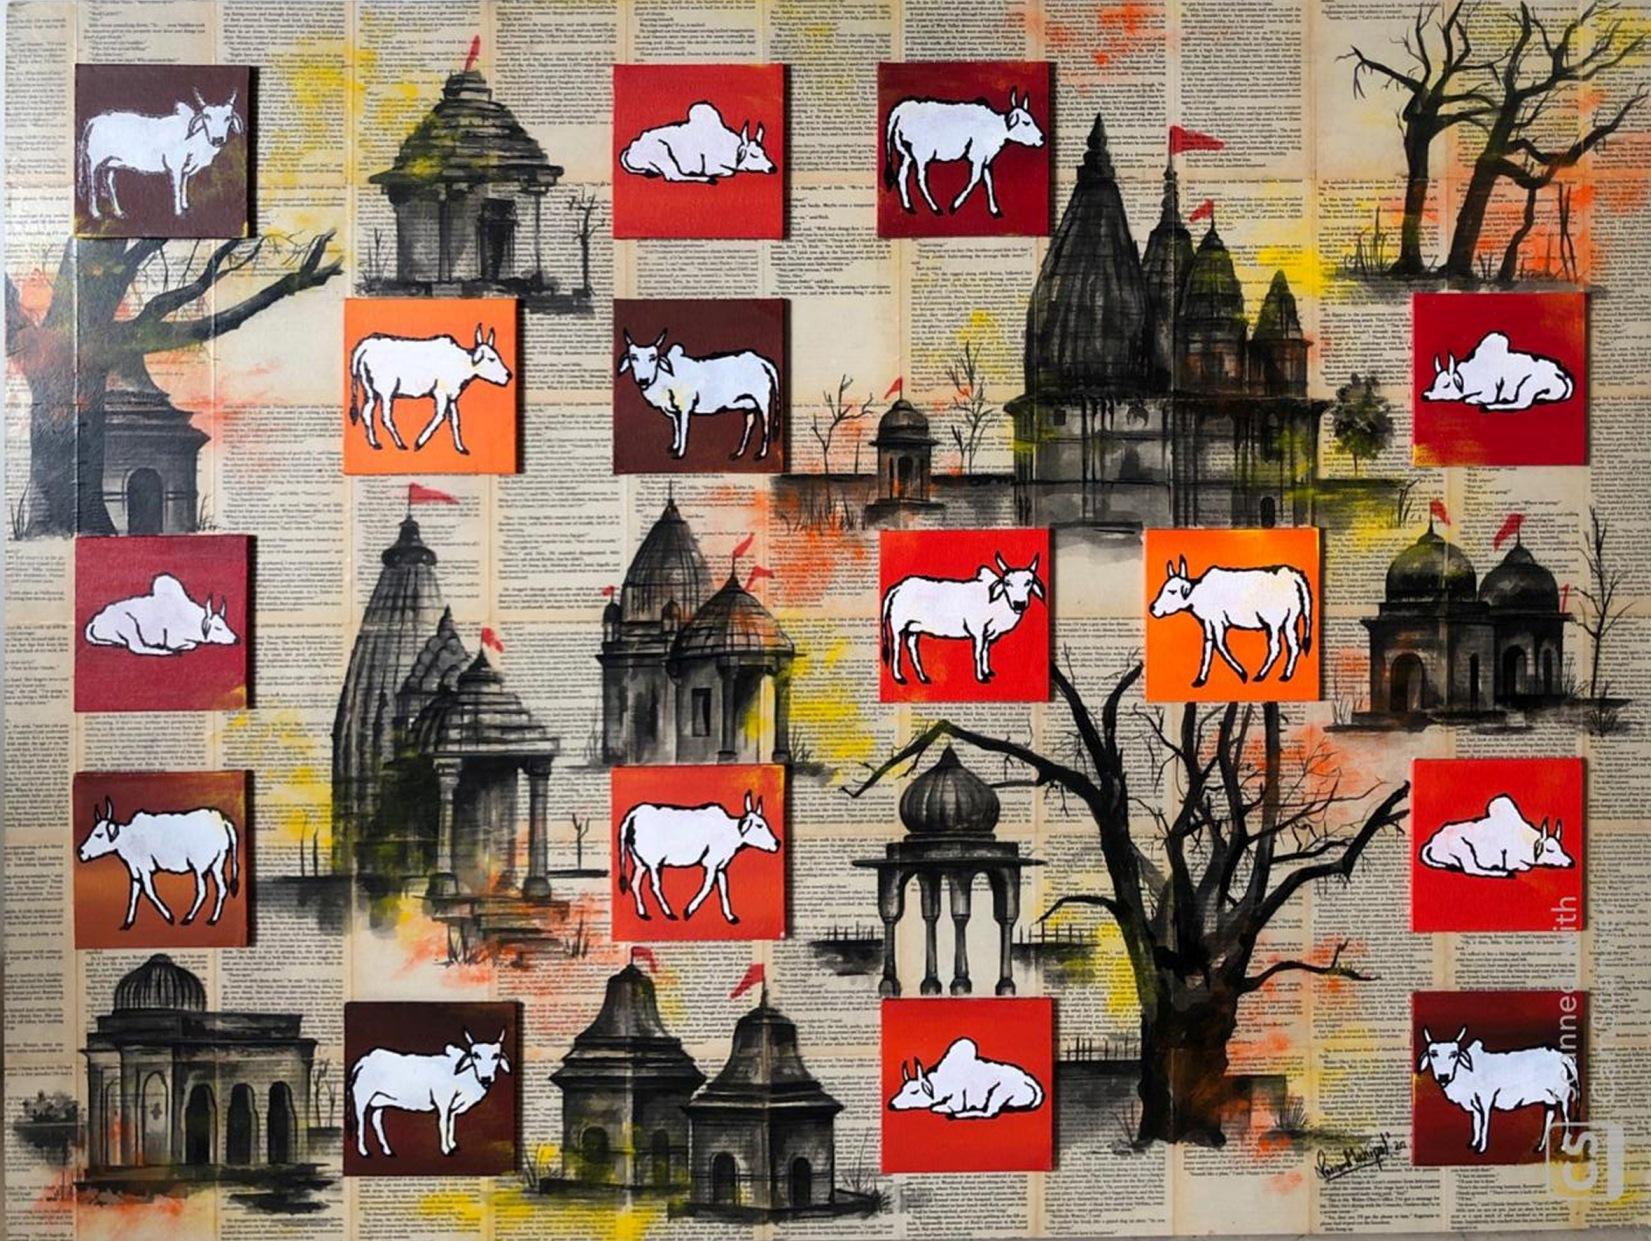 Naman Mahipal Figurative Painting - Untitled Mixed Media Ink & Acrylic on Canvas on Wood by Indian Artist "In Stock"